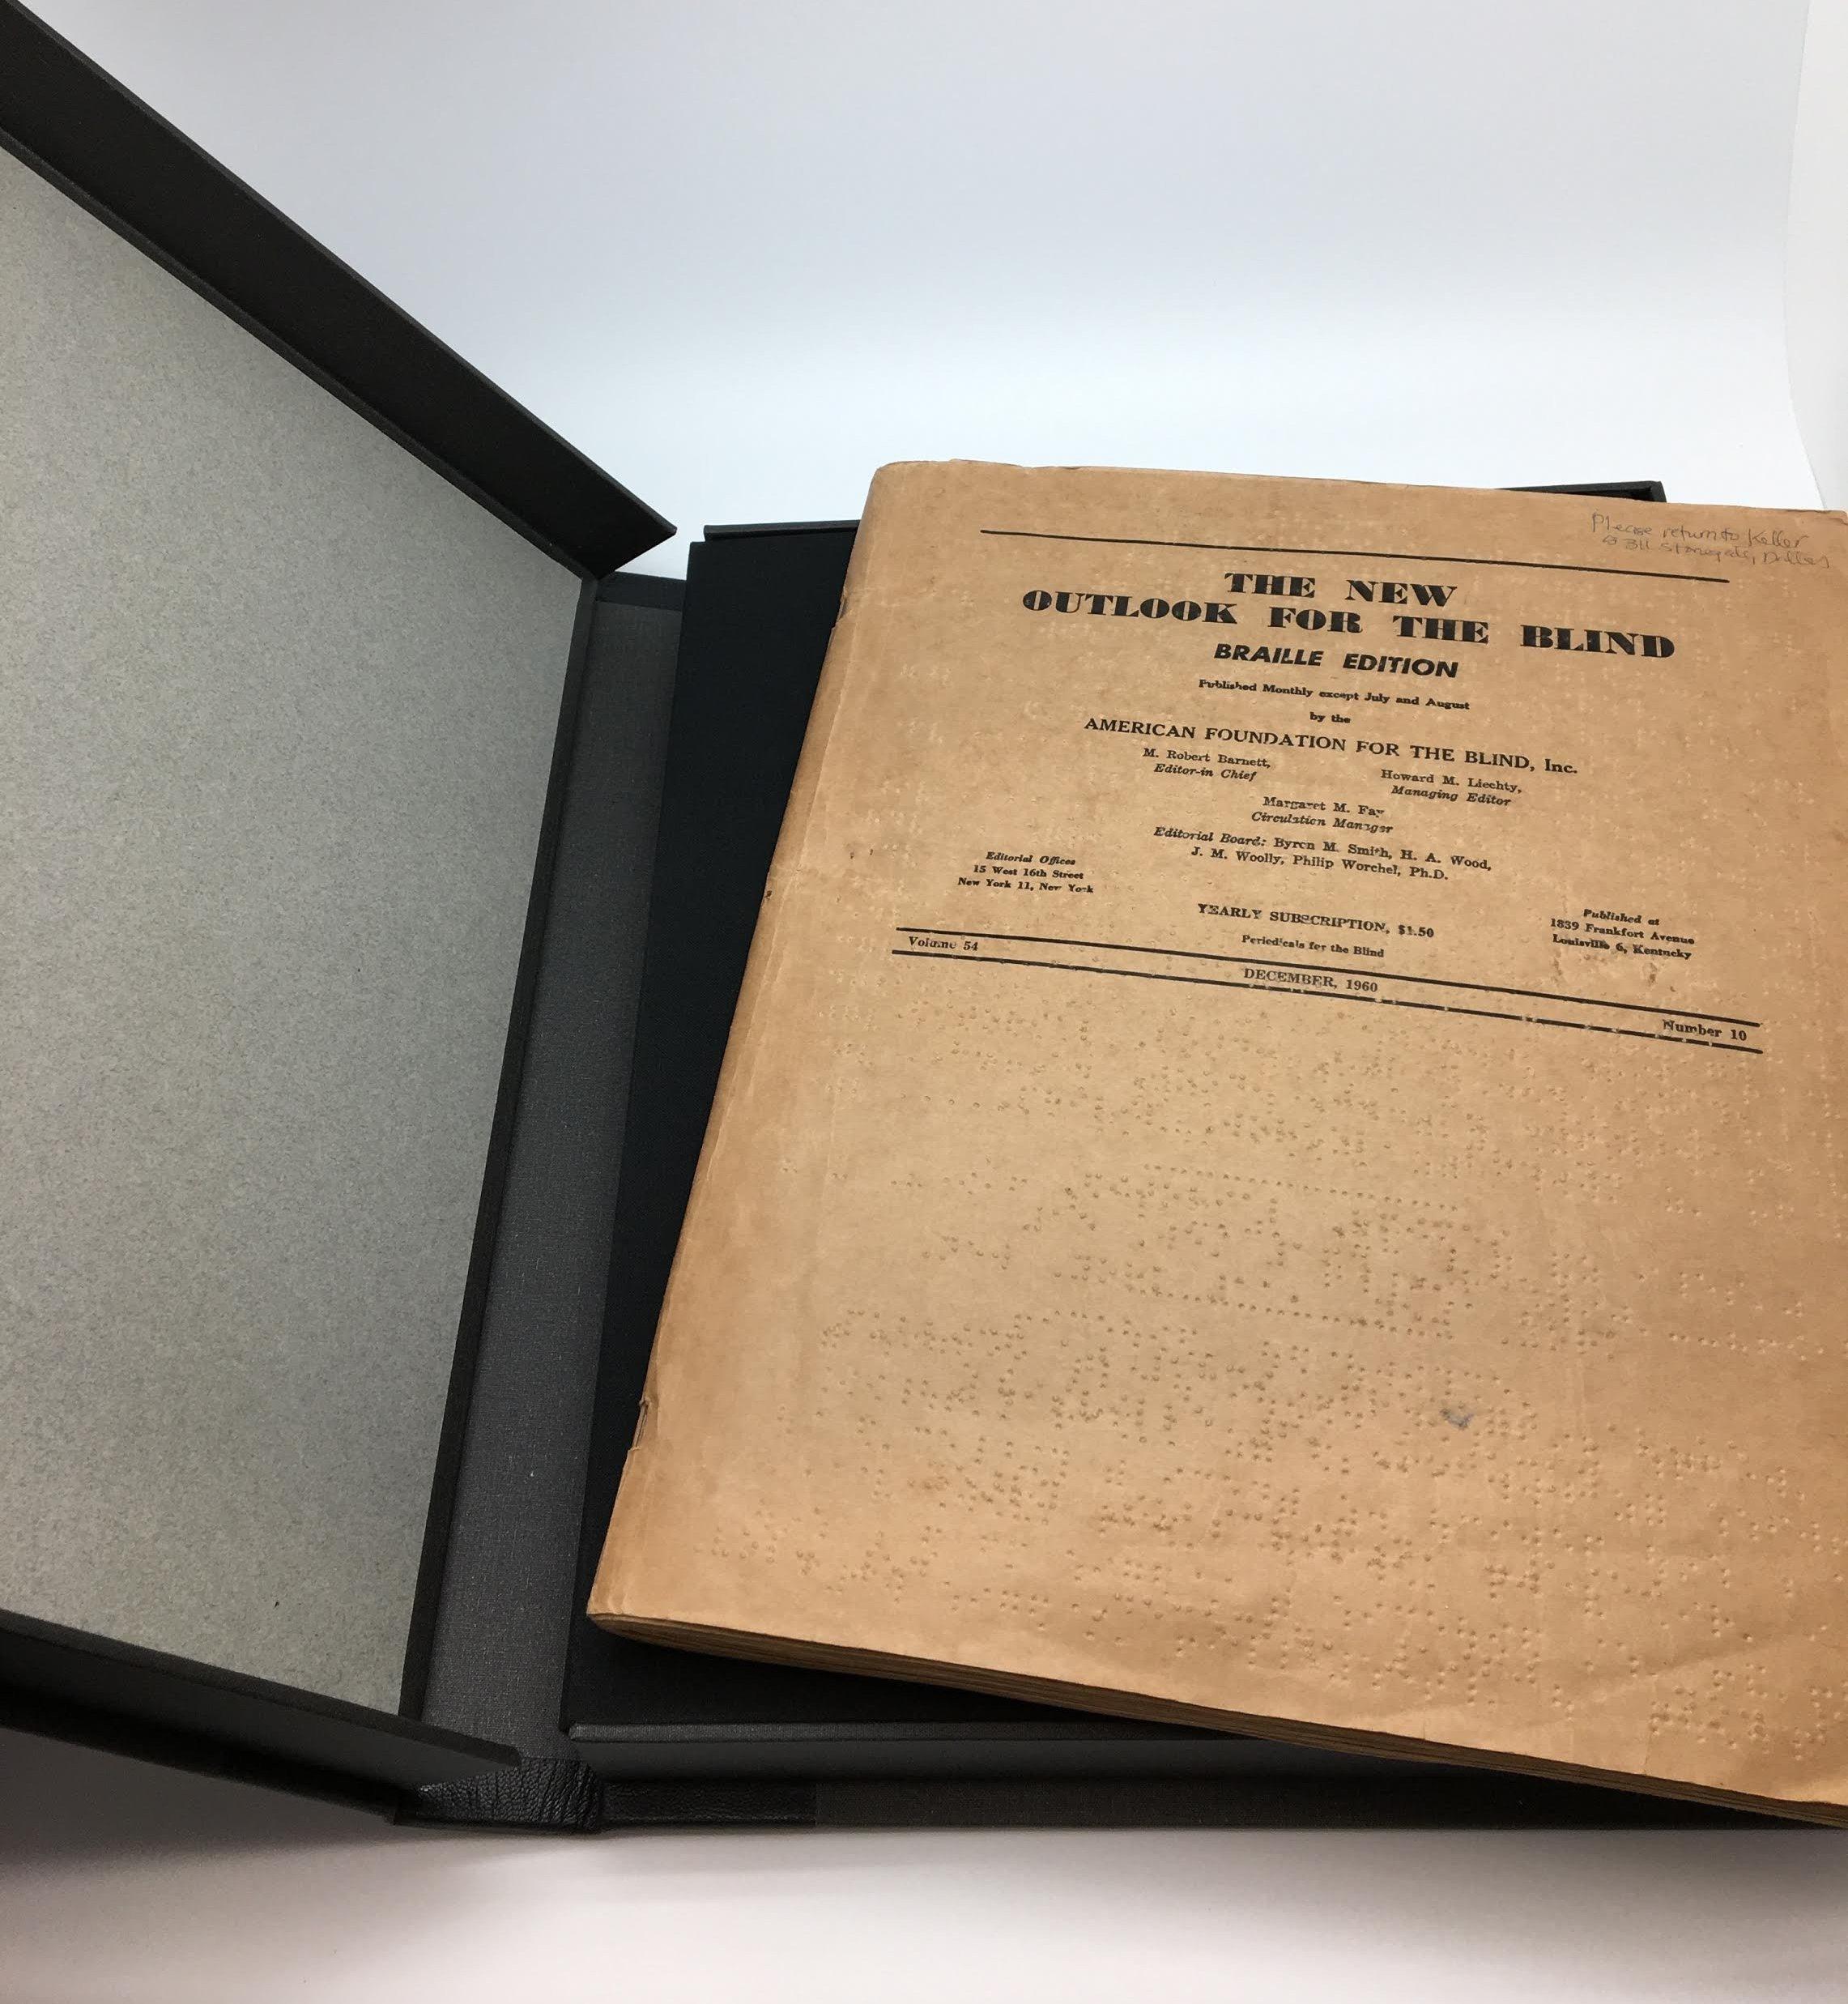 This is Helen Keller’s personal reading copy of The New Outlook for the Blind, December 1960, Volume 54, Number 10. The periodical is inscribed in the upper right corner. Inscription reads: “Please return to Keller, 5311 Stonegate, Dallas” in blue